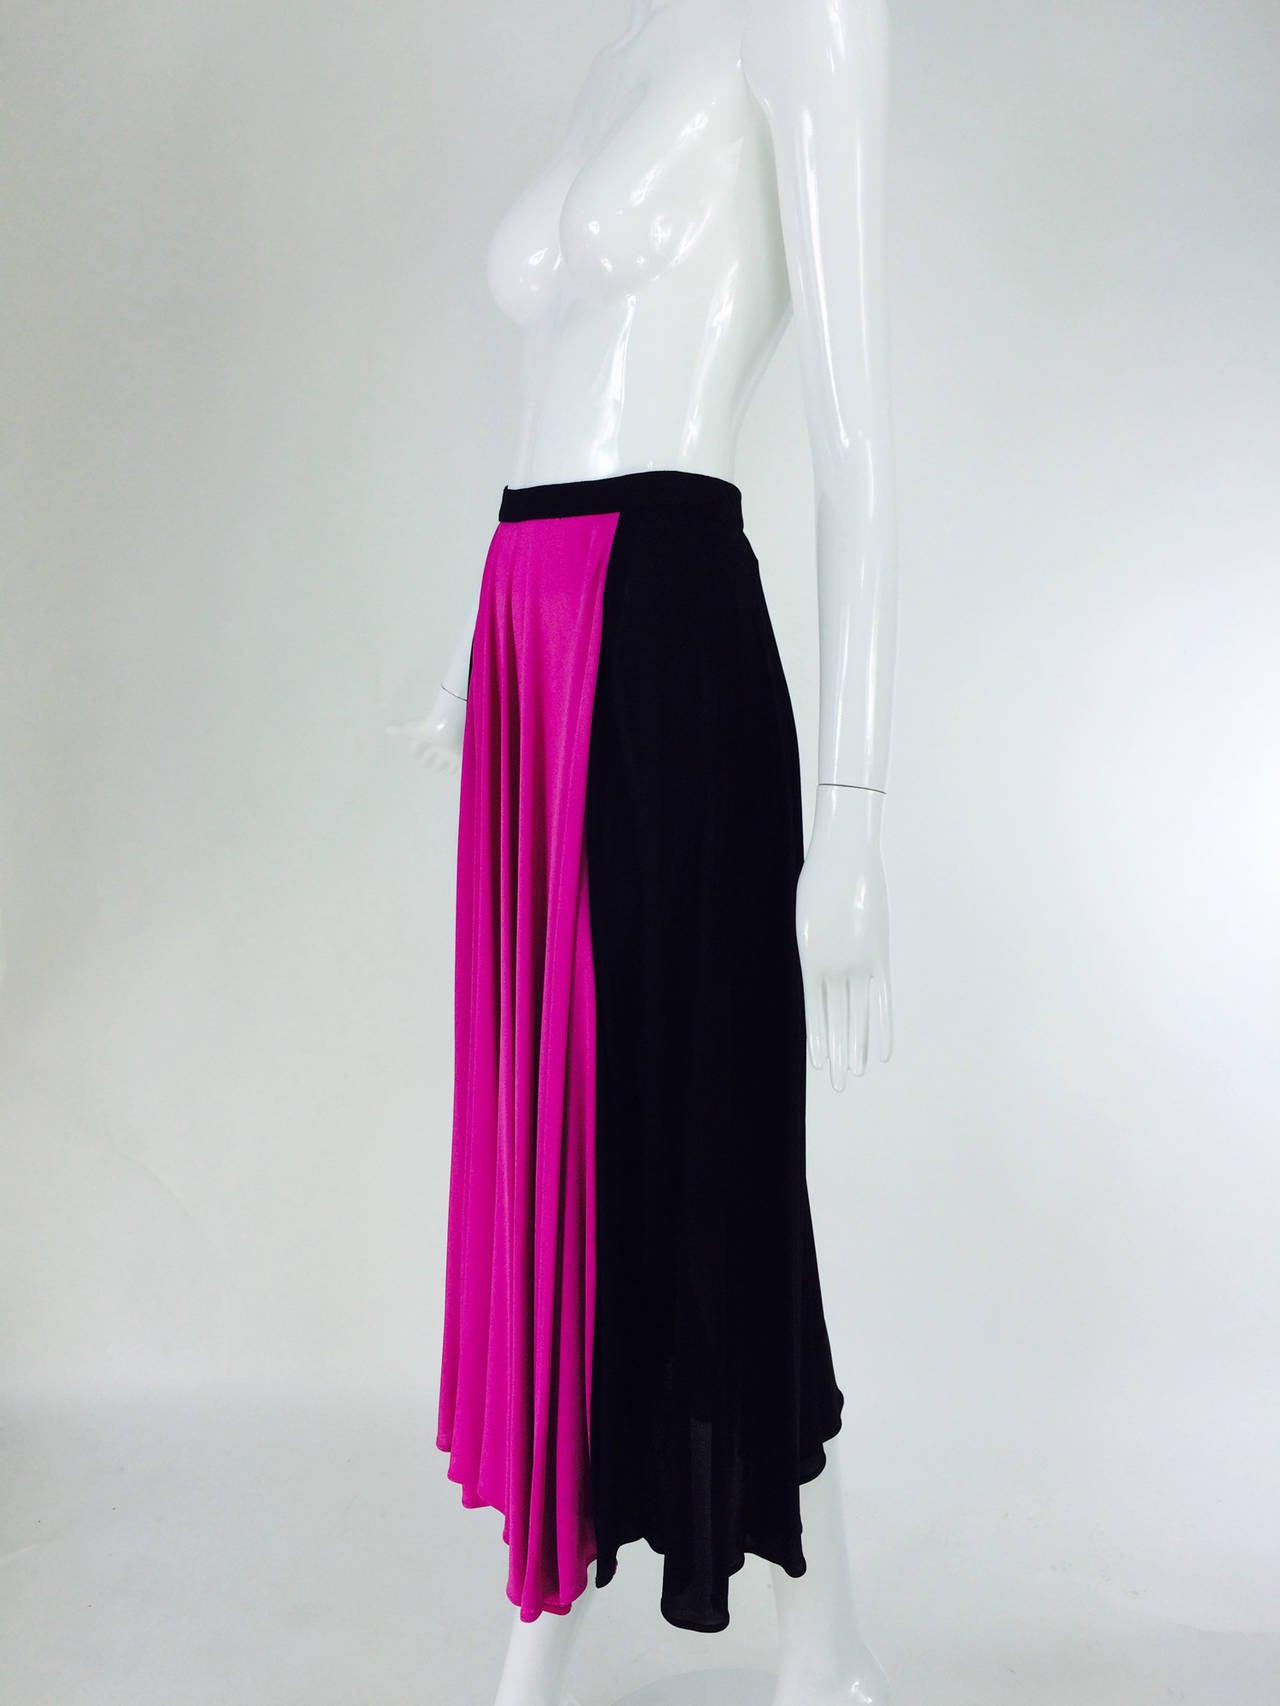 Yves St Laurent Rive Gauche black & hot pink jersey skirt 1970s...1940s influenced rayon jersey skirt in black & hot pink...The weight of the fabric gives this skirt nice drape & swing...Banded waist skirt has a front panel of hot